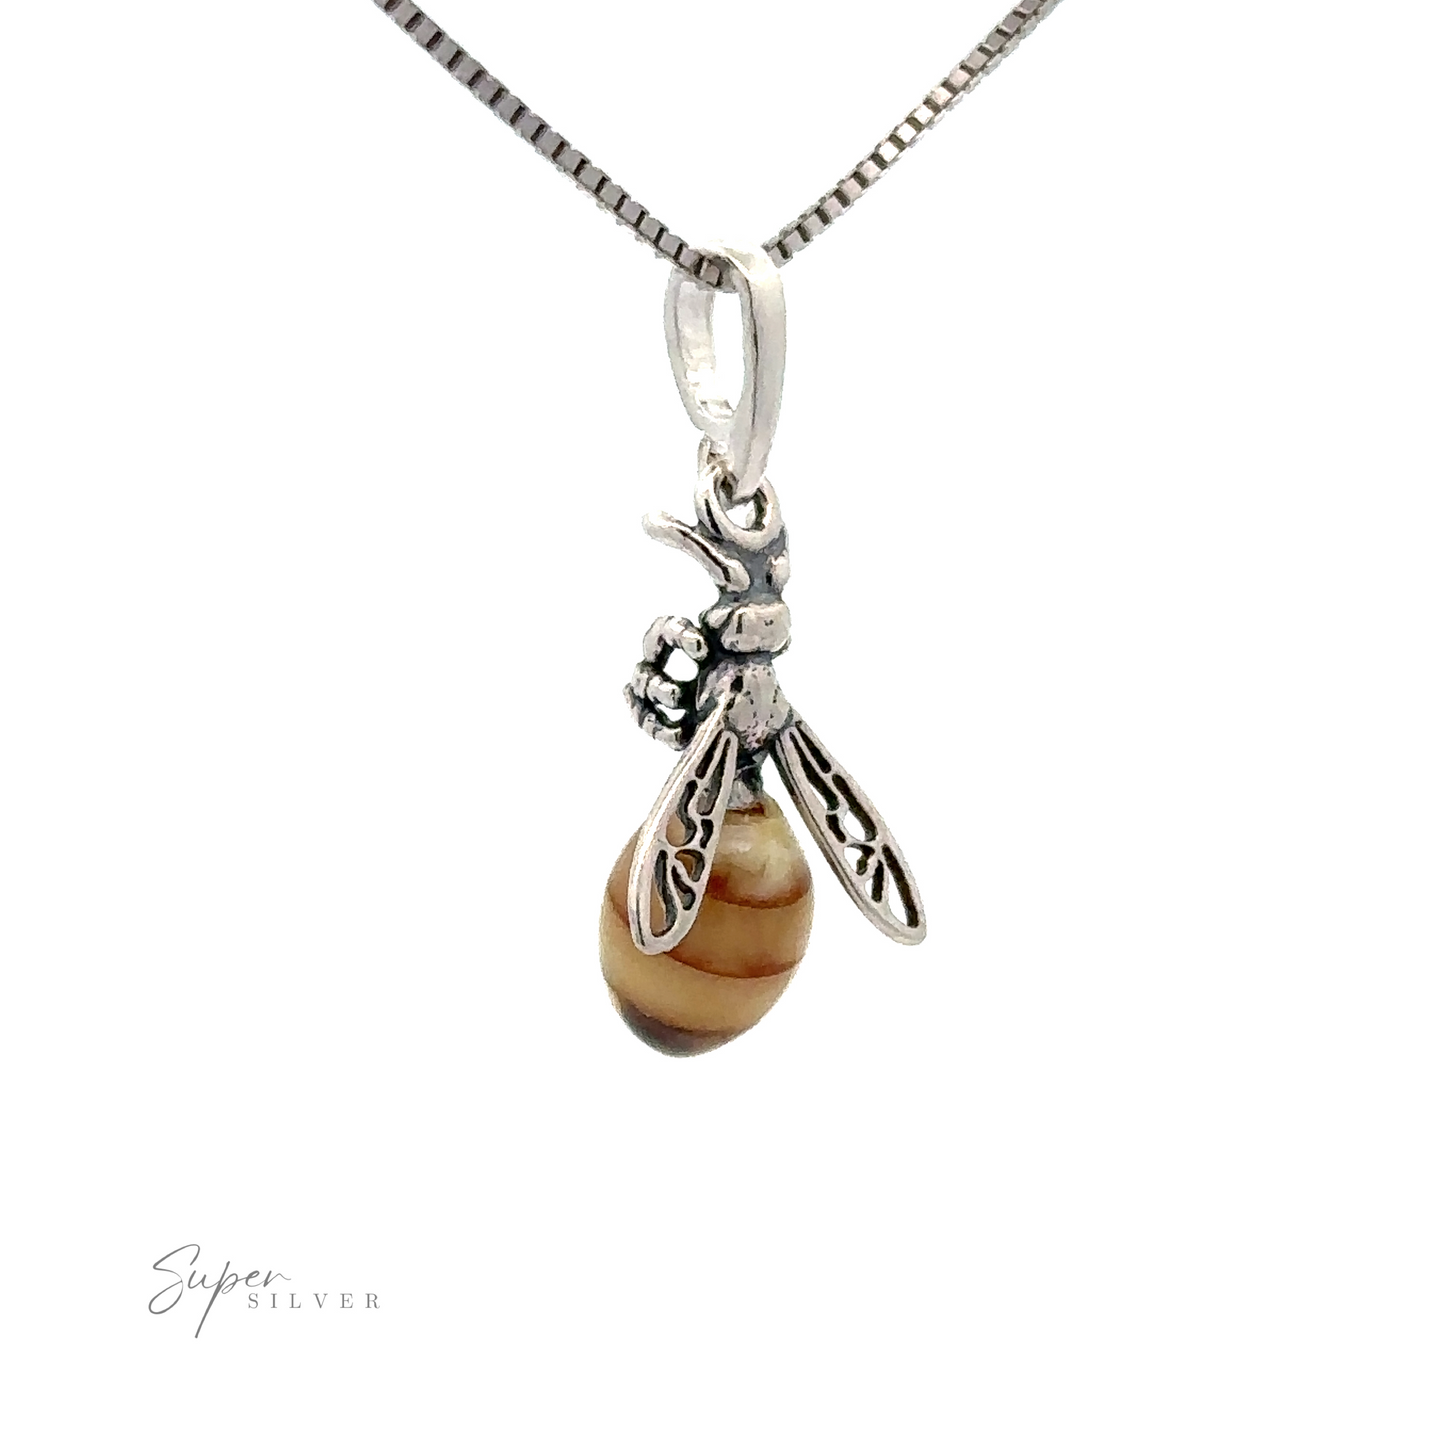 
                  
                    A Beautiful Amber Yellow Jacket Pendant with detailed wings and a polished, amber-colored drop of Baltic amber hangs from a silver chain against a white background.
                  
                